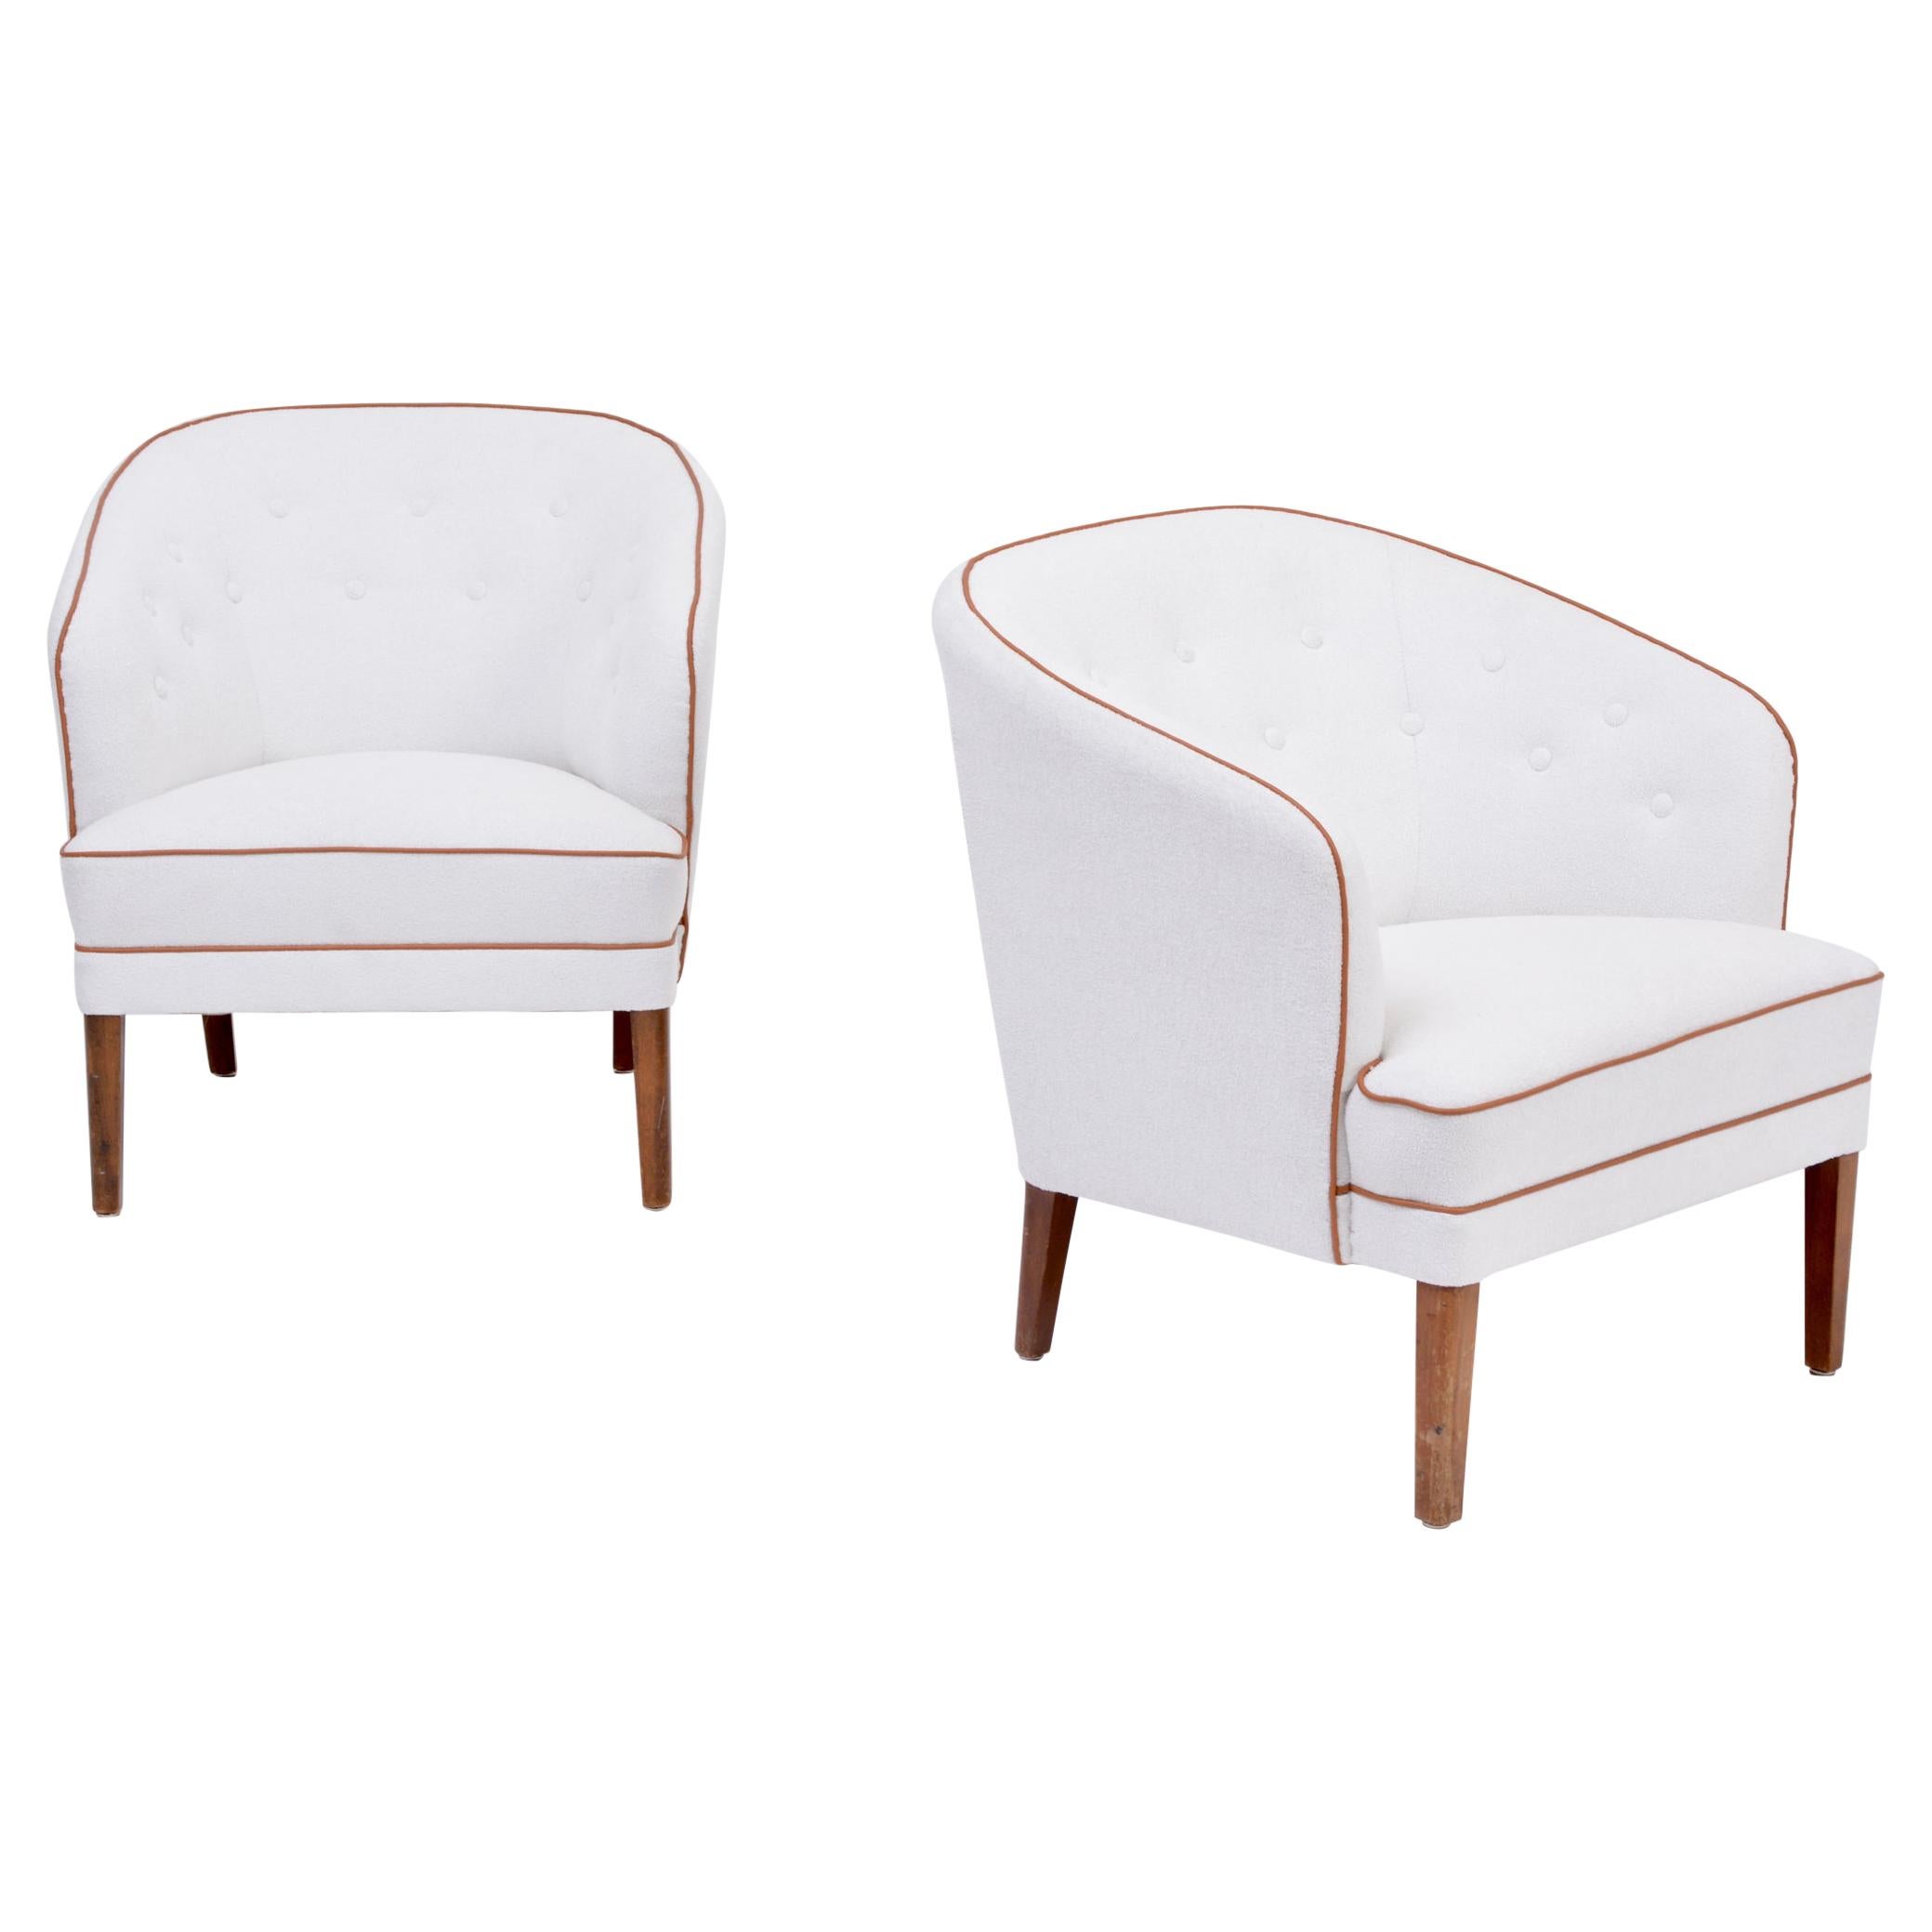 Pair of White Reupholstered Danish Mid-Century Armchairs by Ludvig Pontoppidan For Sale